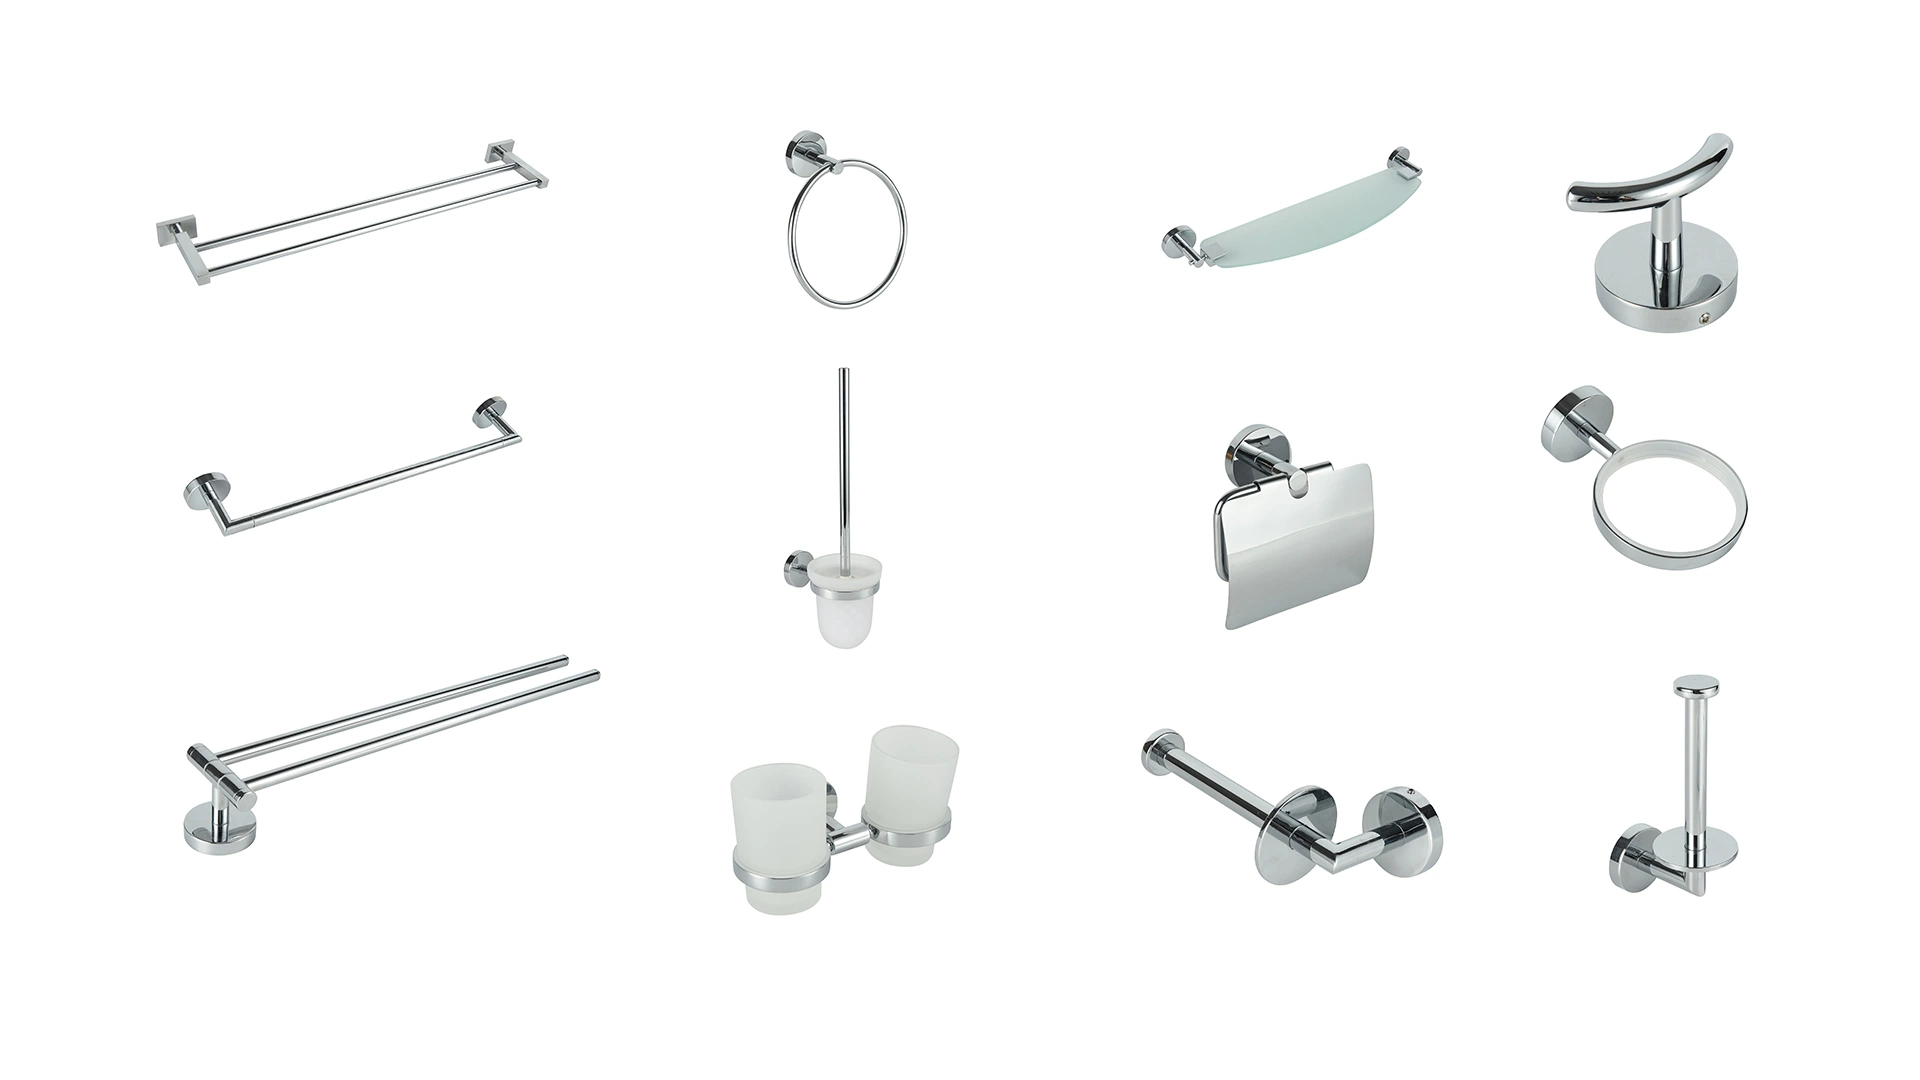 Customize Bathroom Fitting Stainless Steel Wall Mounted Toilet Brush Holder OEM Manufacturer Bathroom Accessories